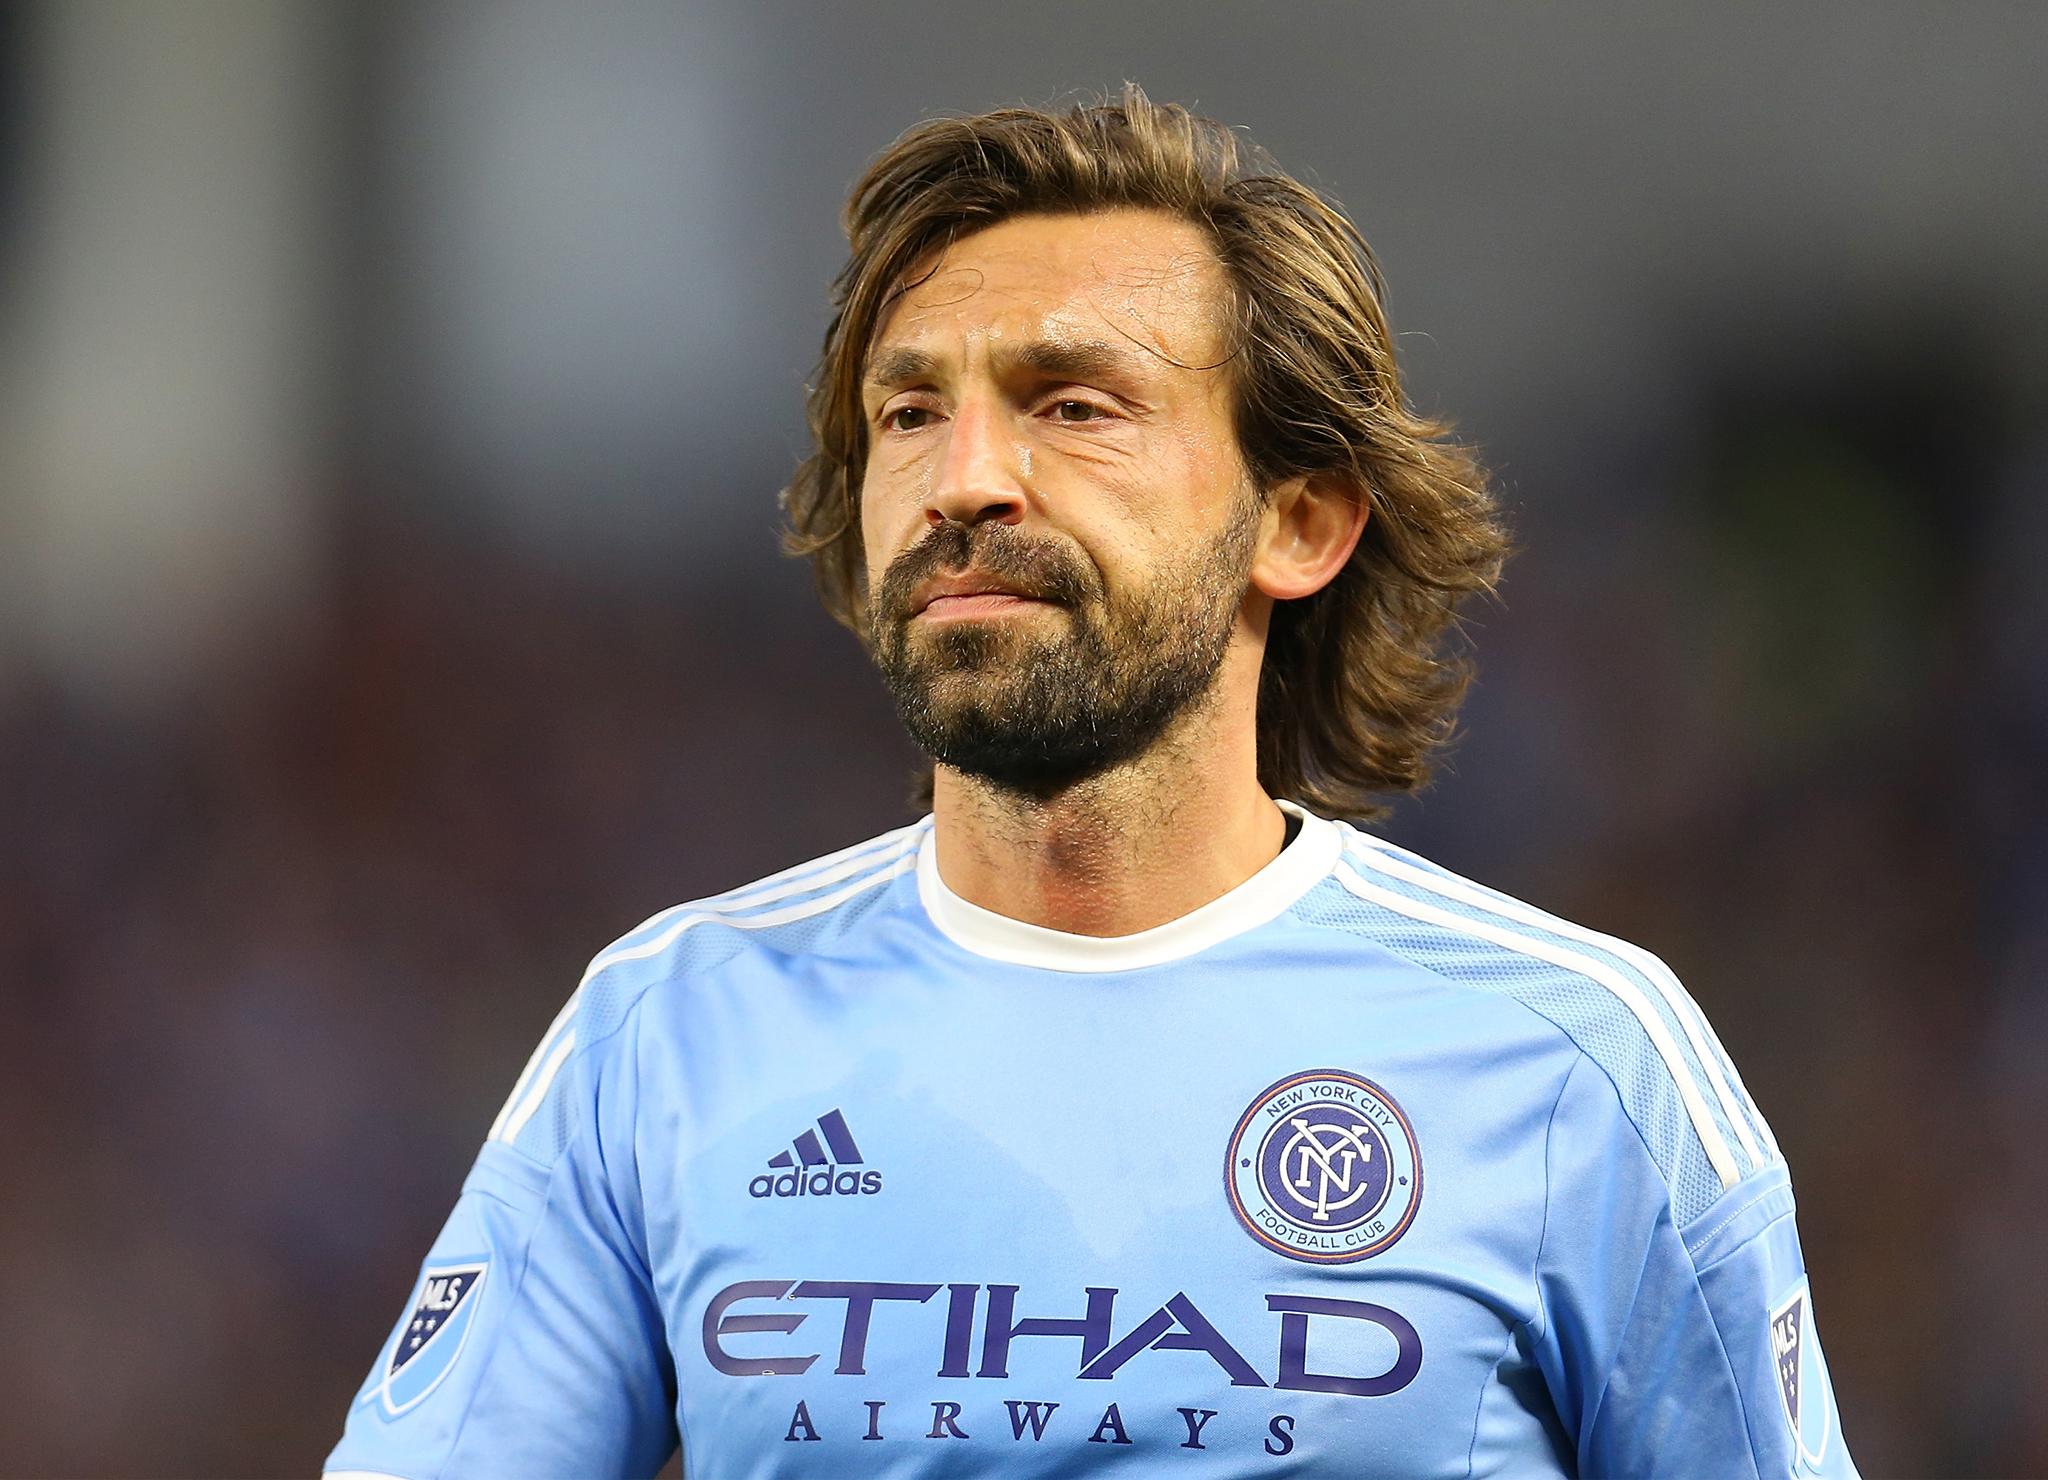 &#13;
Pirlo is calling it a day after an illustrious career &#13;